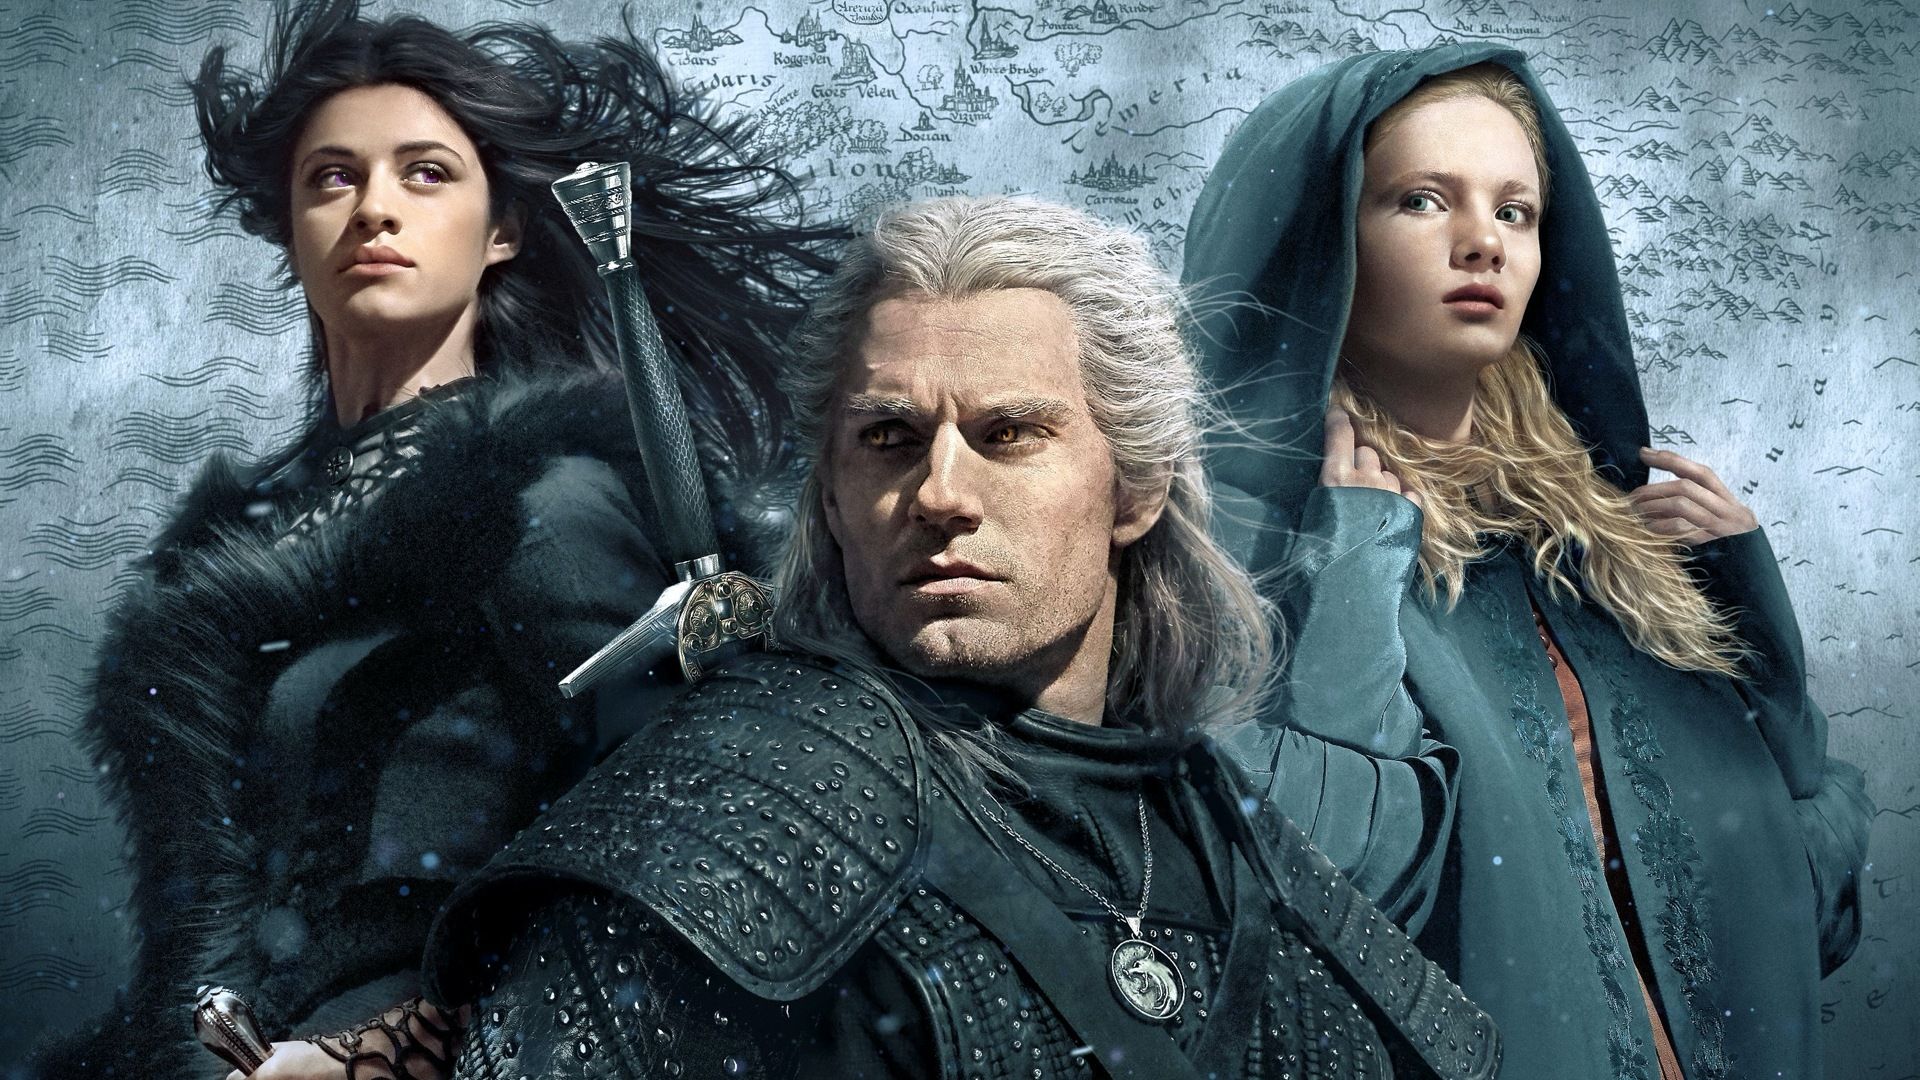 The Witcher: The Netflix Series — Season 2 cast and release window